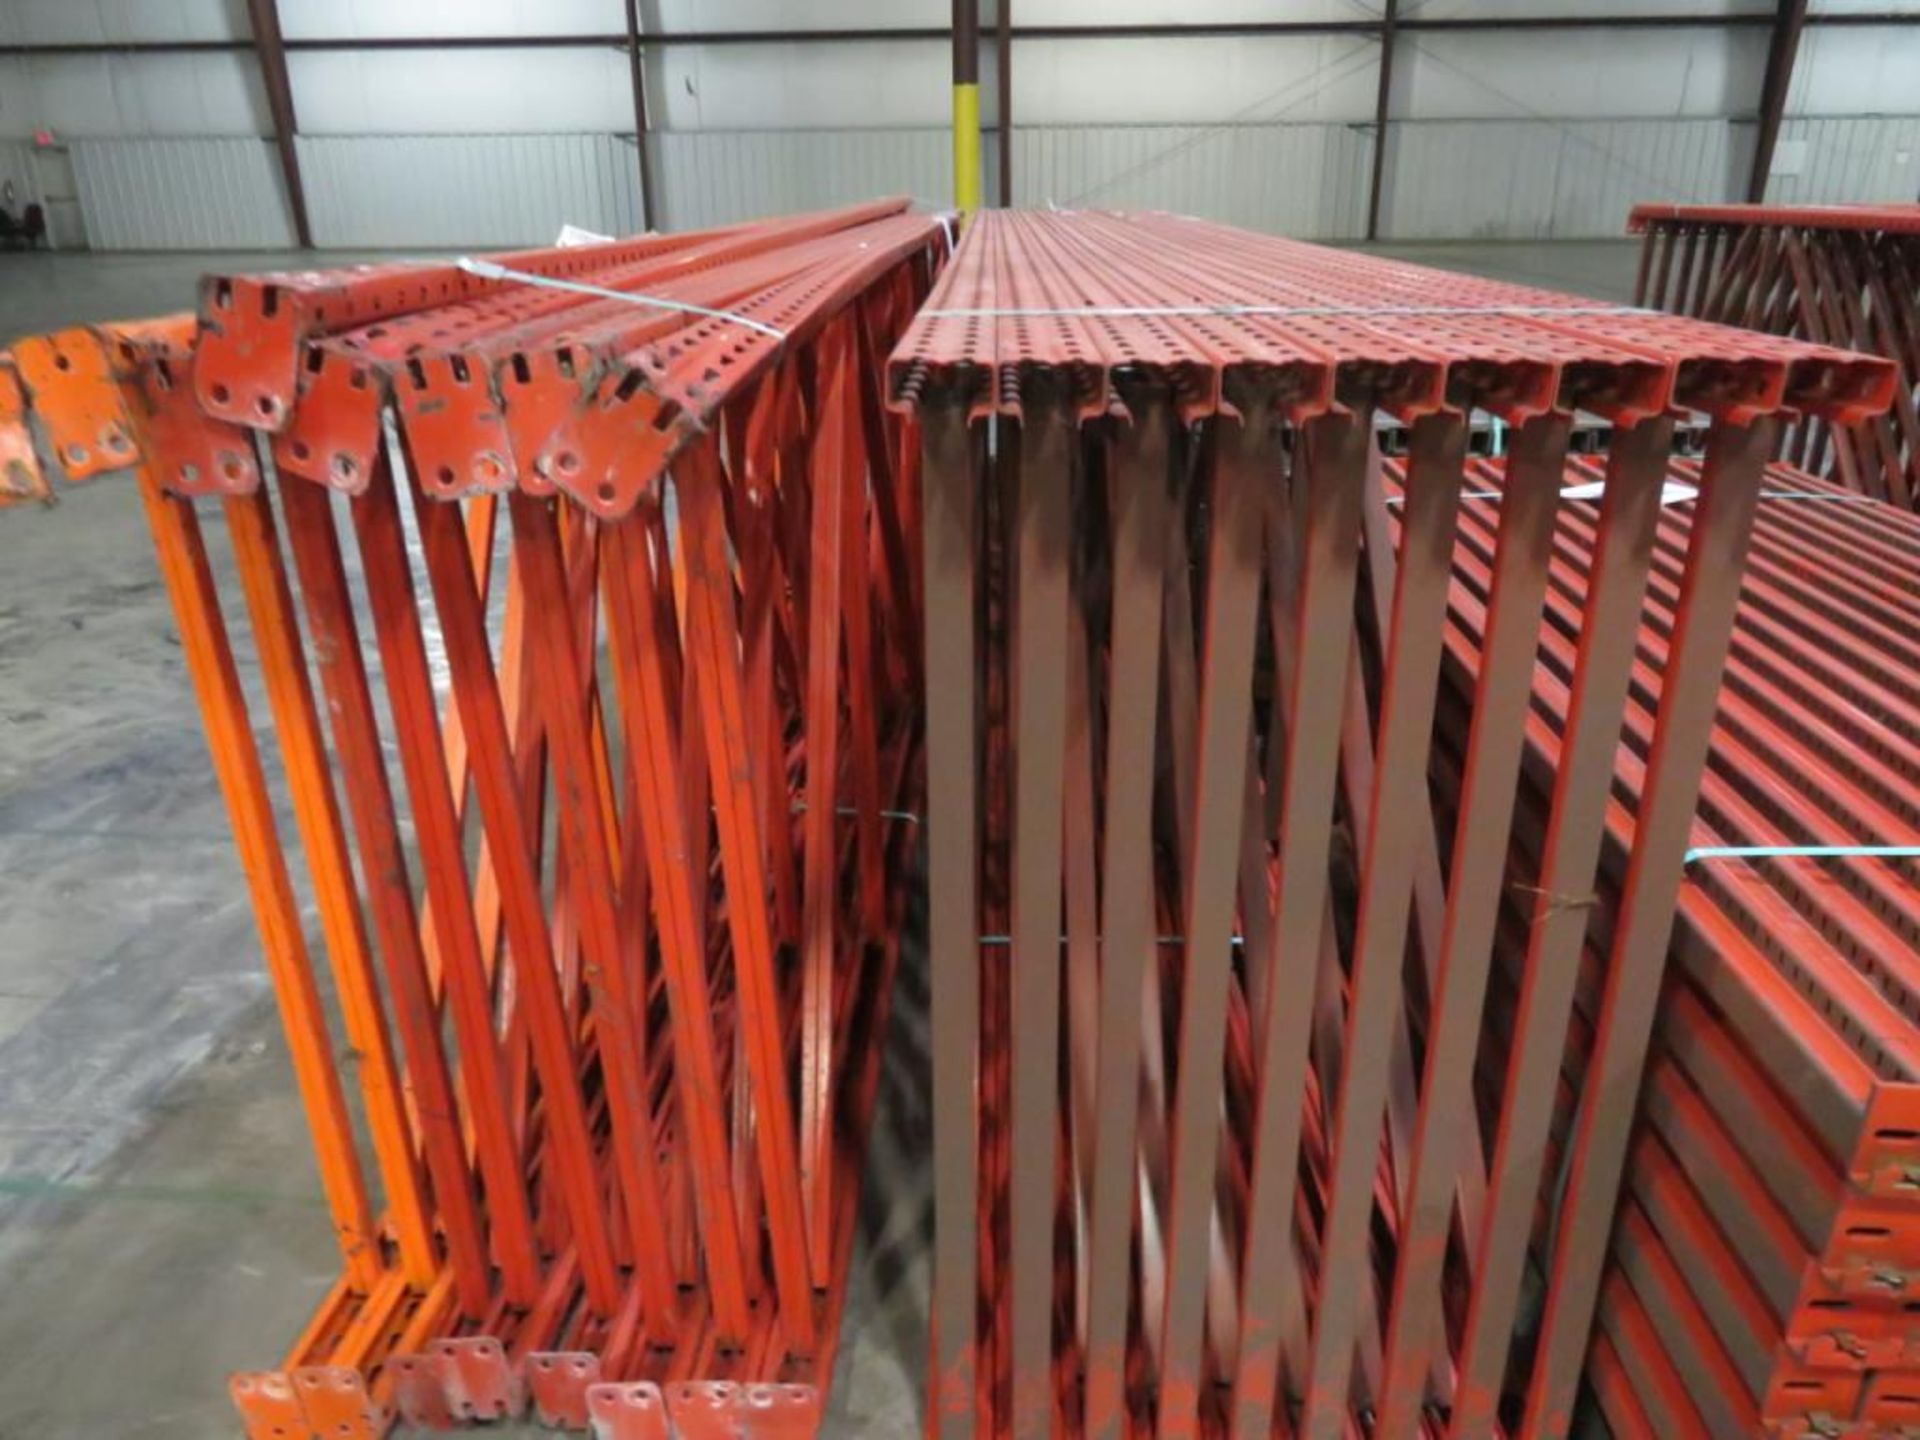 pallet racking 9 uprights 48" wide and 18' tall, 8 uprights 48" wide and 16' tall, 112 beams 2 1/ - Image 7 of 8